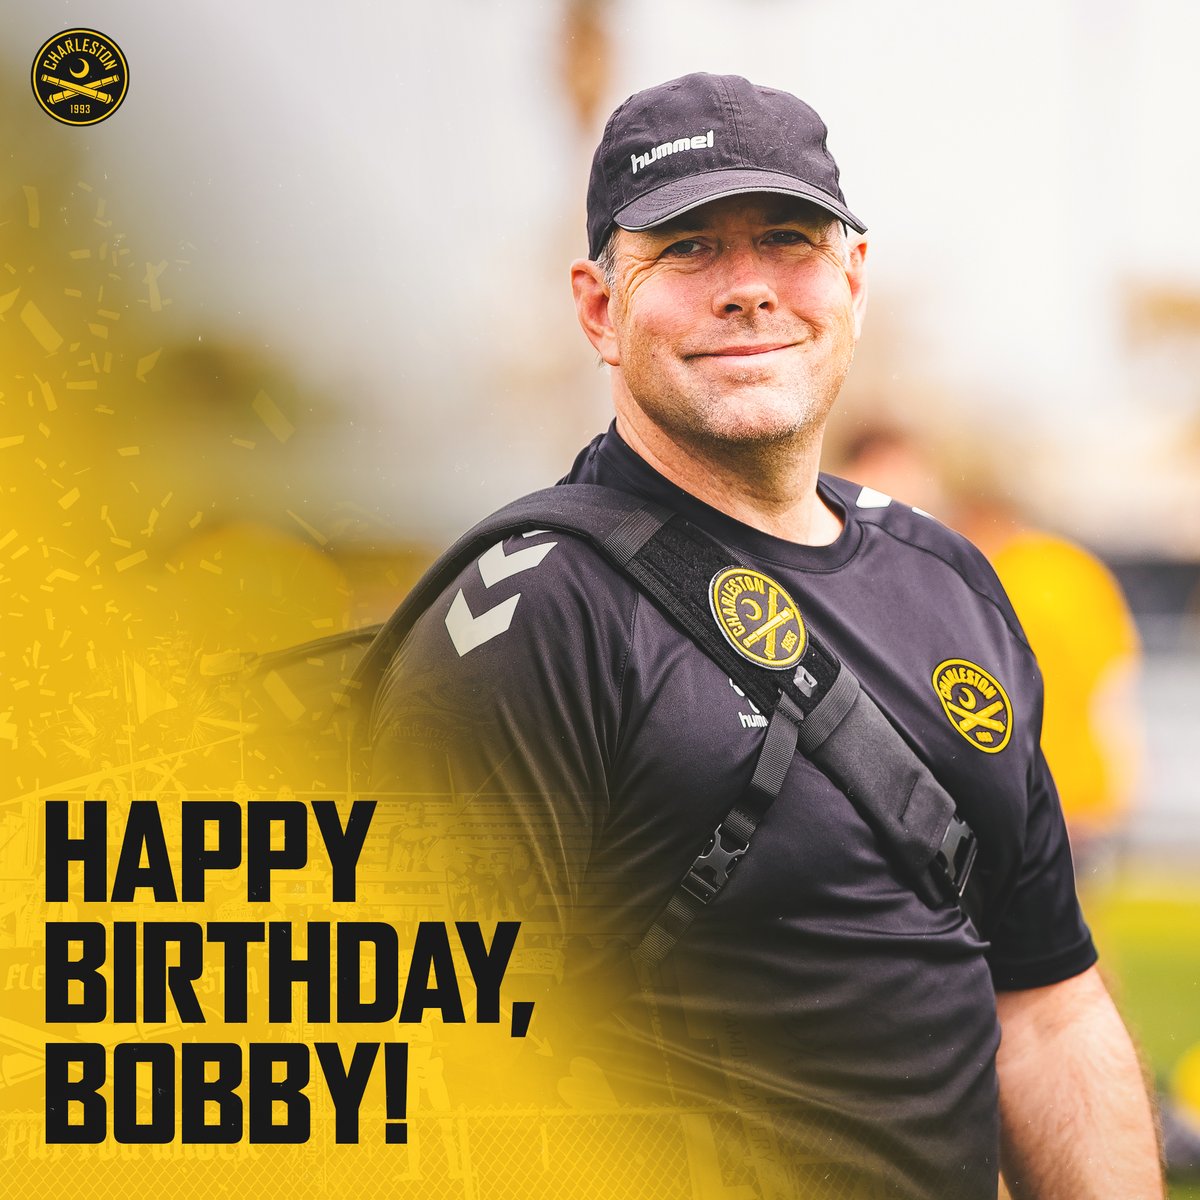 Happy birthday to one of the best in the business, @BWW_ATC! 🎊🥳🎂